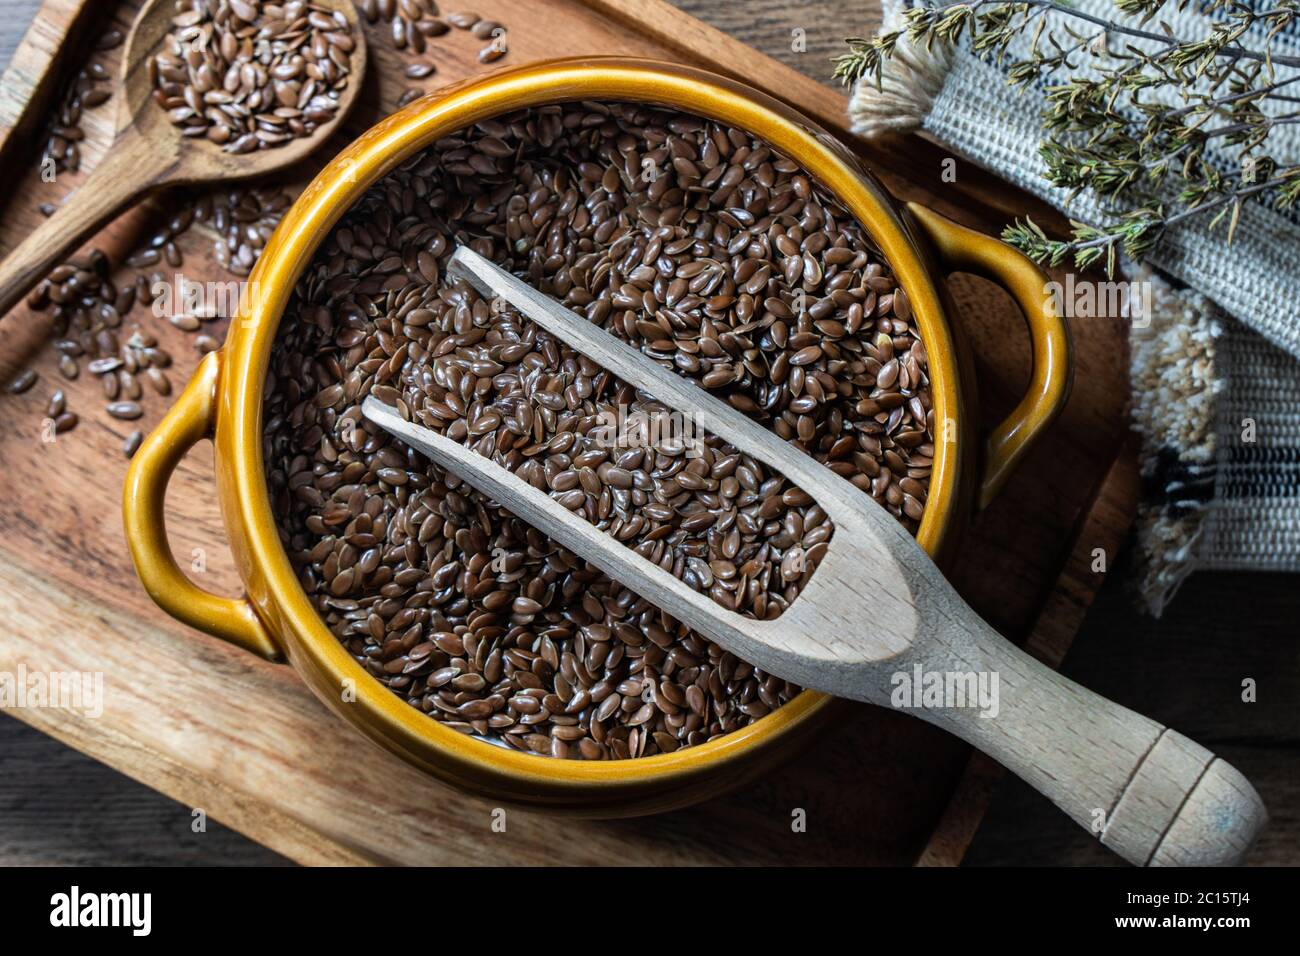 Chia seeds inside rustic bowl. Chia seeds are a popular superfood packed with healthy vitamins and antioxidants. Stock Photo